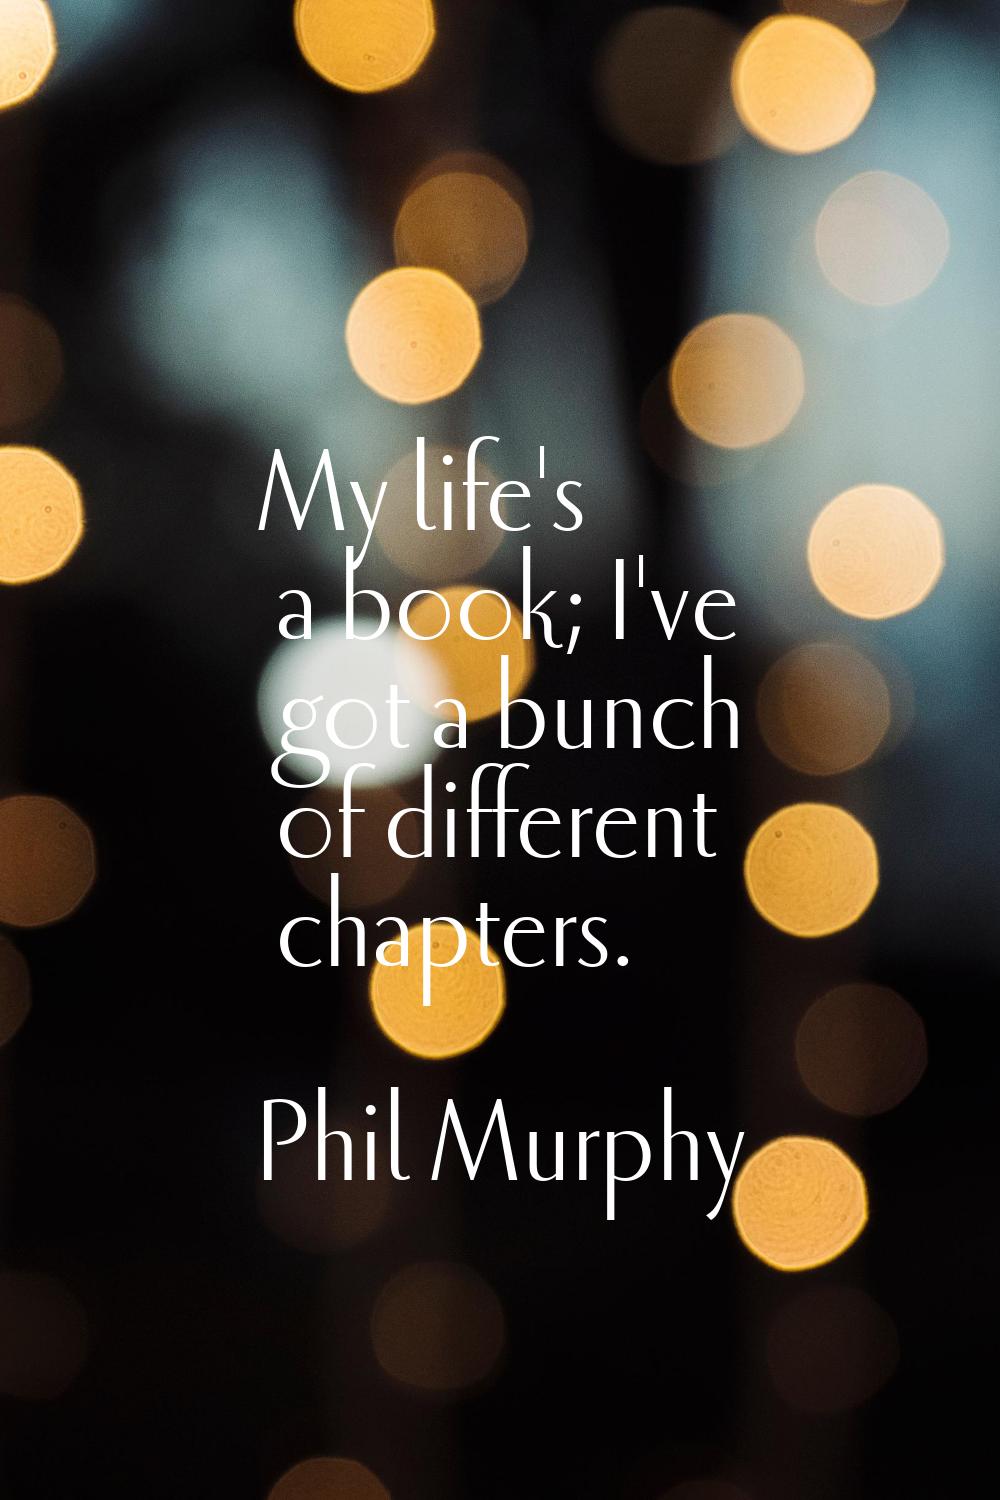 My life's a book; I've got a bunch of different chapters.